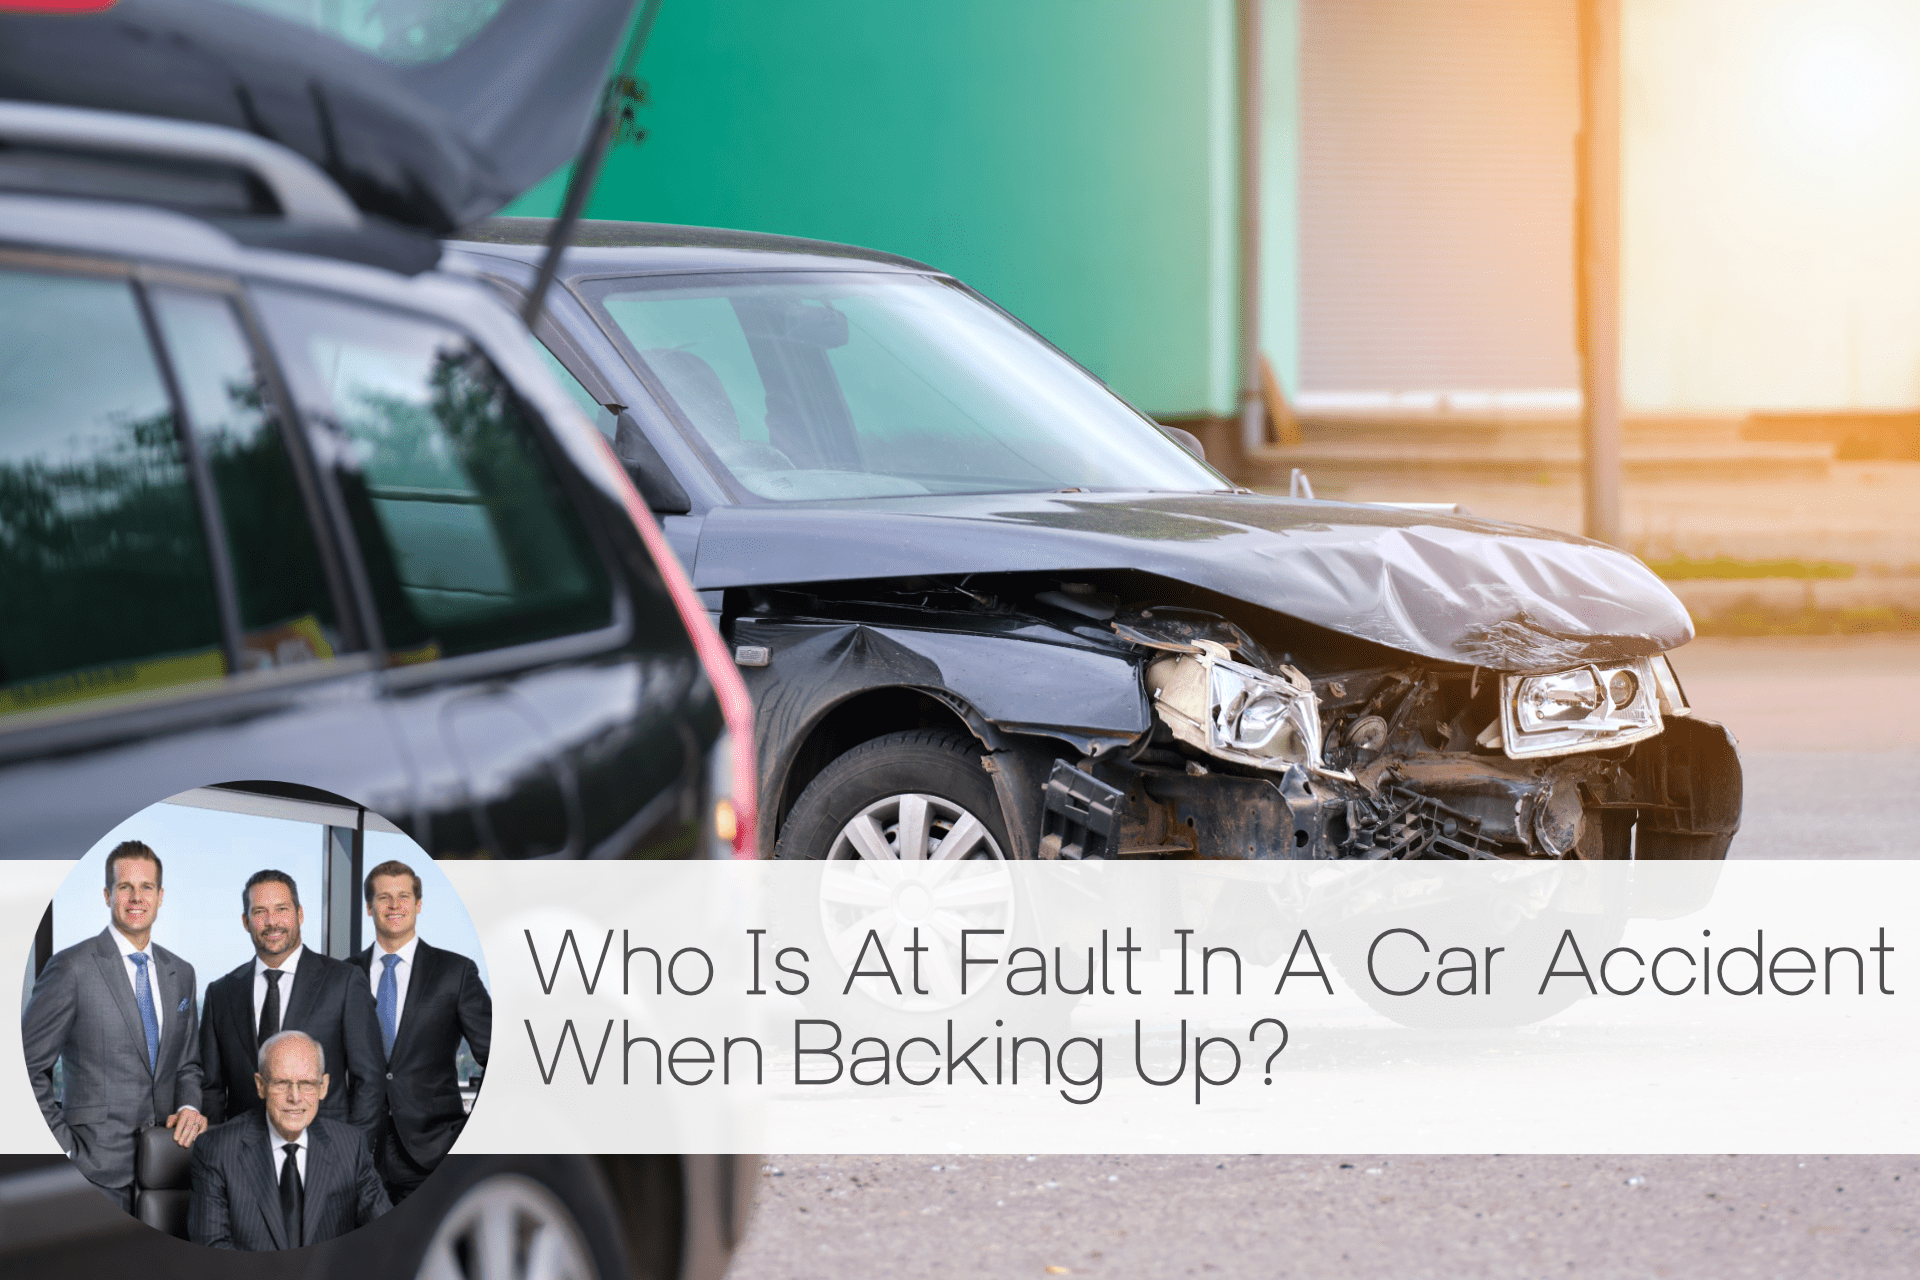 fault in a car accident when backing up, personal injury, car accident, negligence